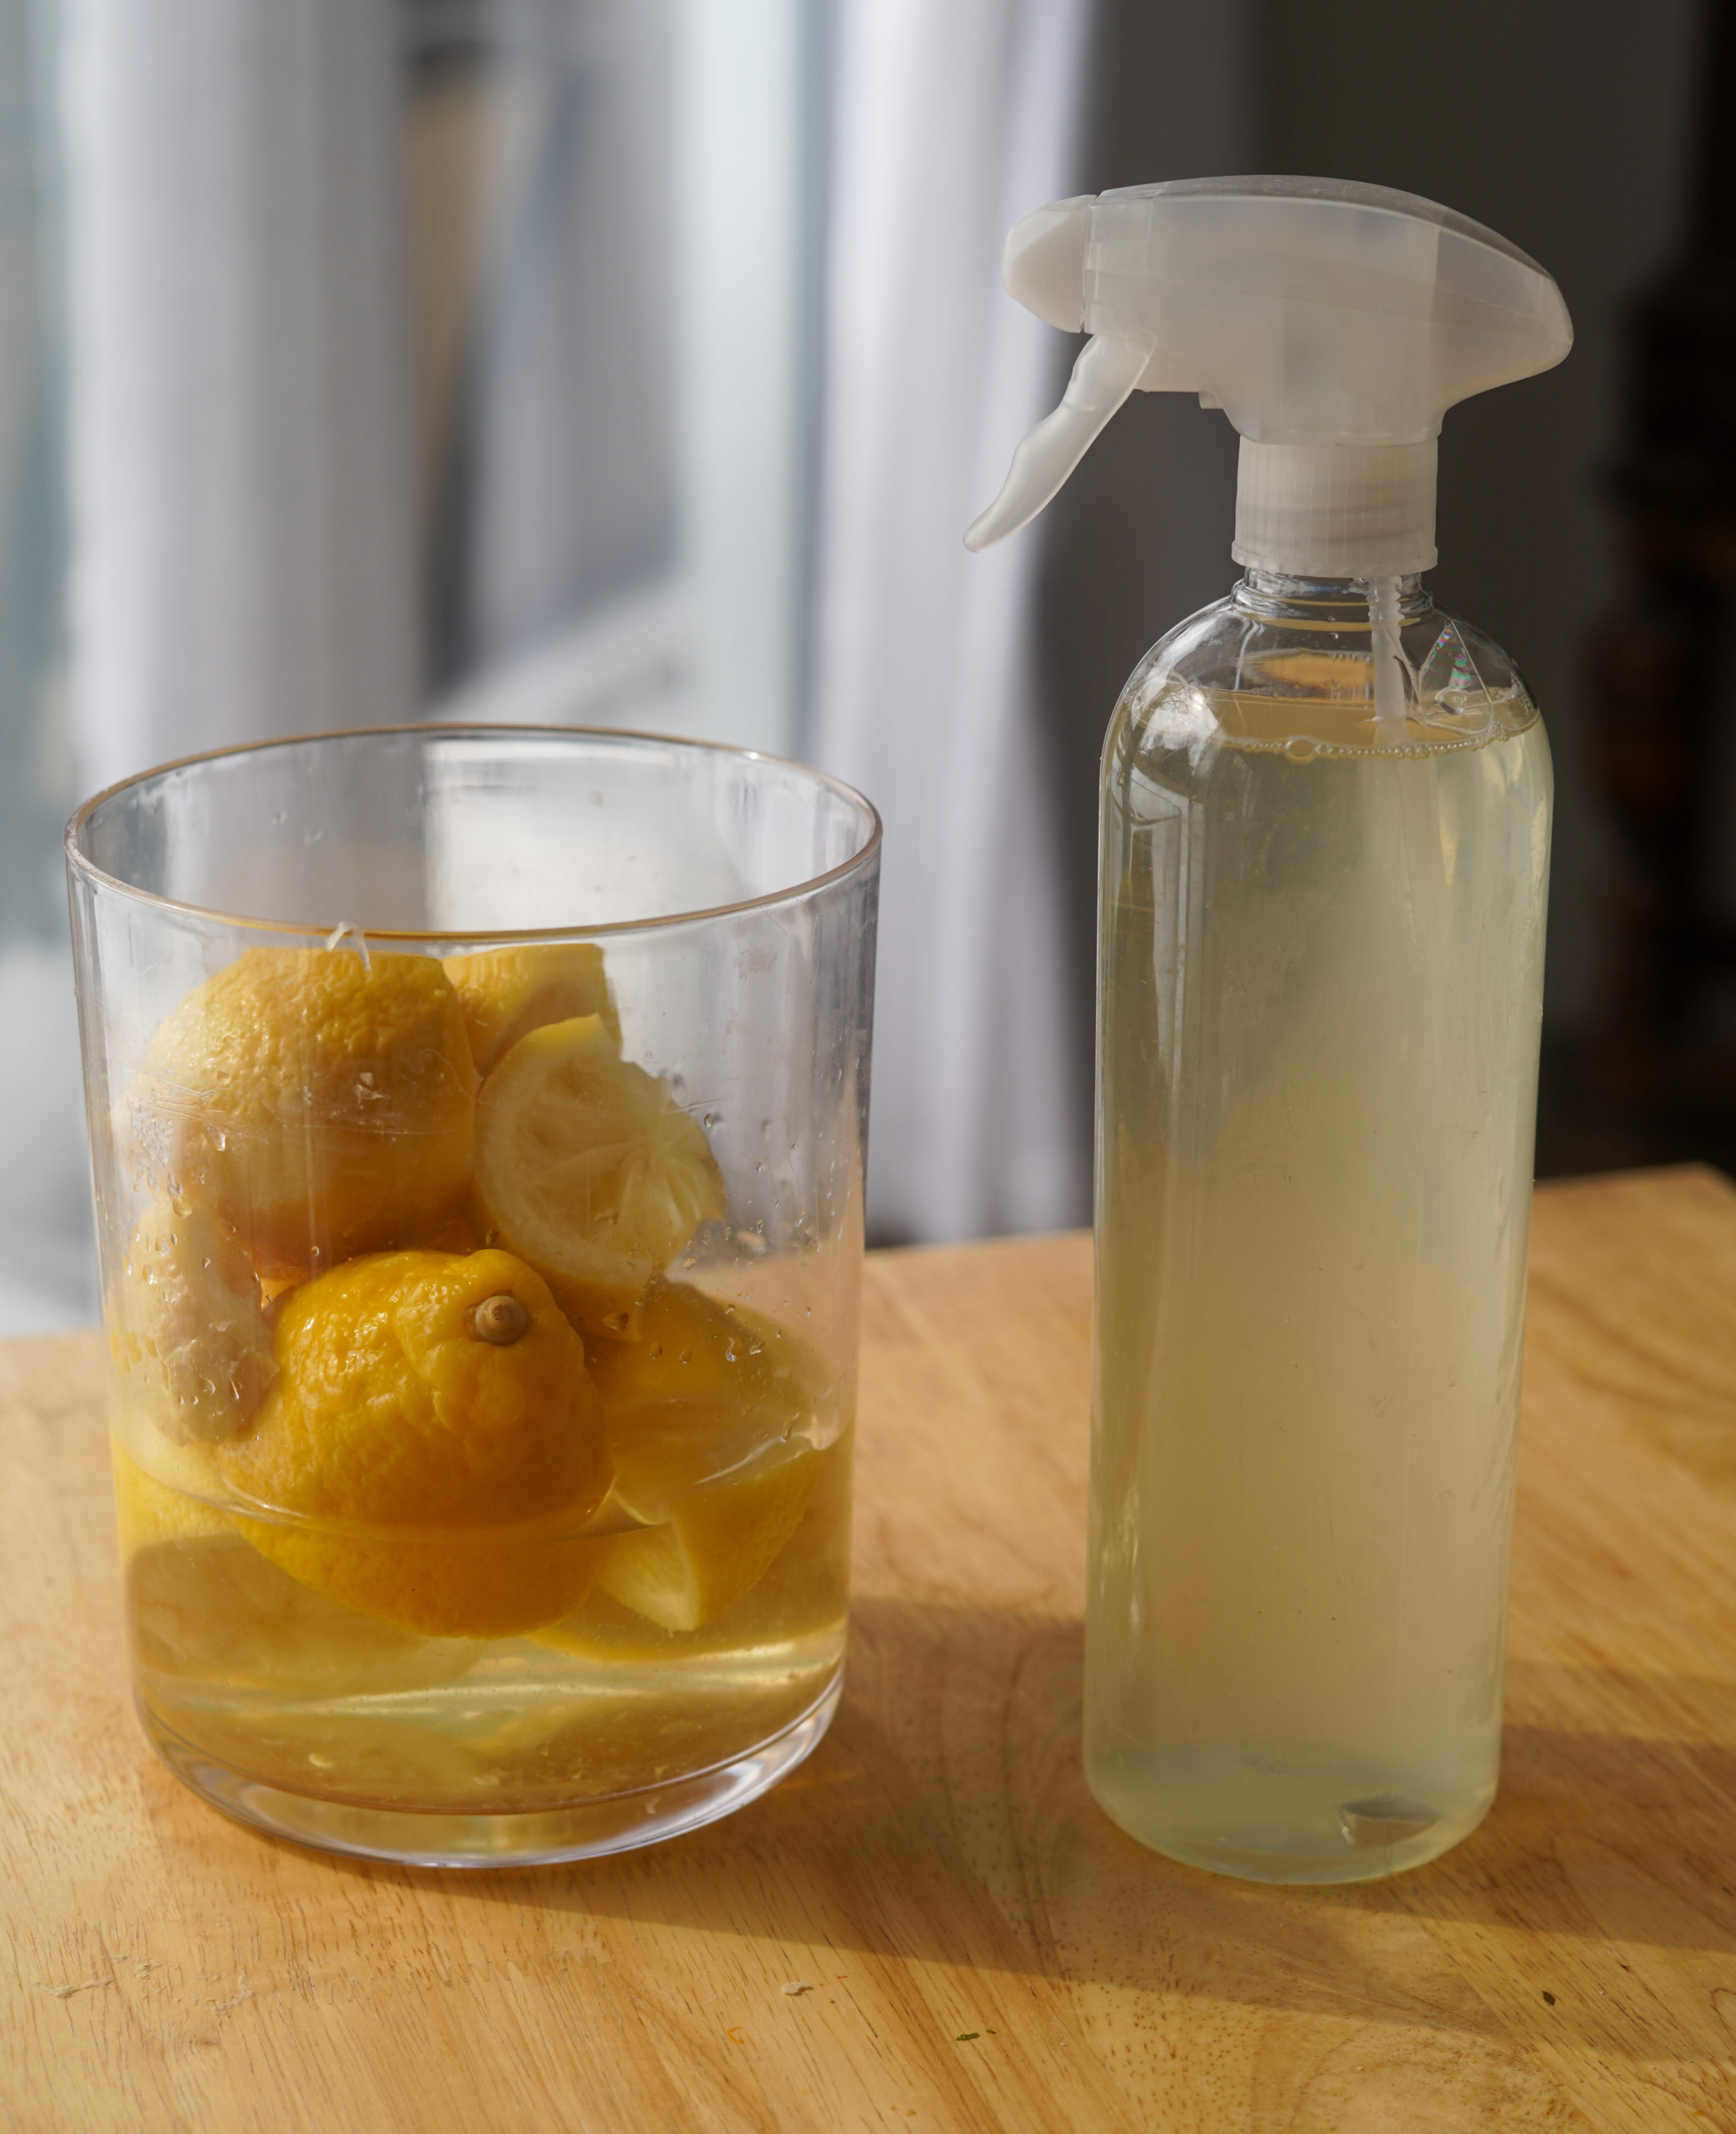 Homemade Cleaners You Can Make with Ingredients from Your Pantry